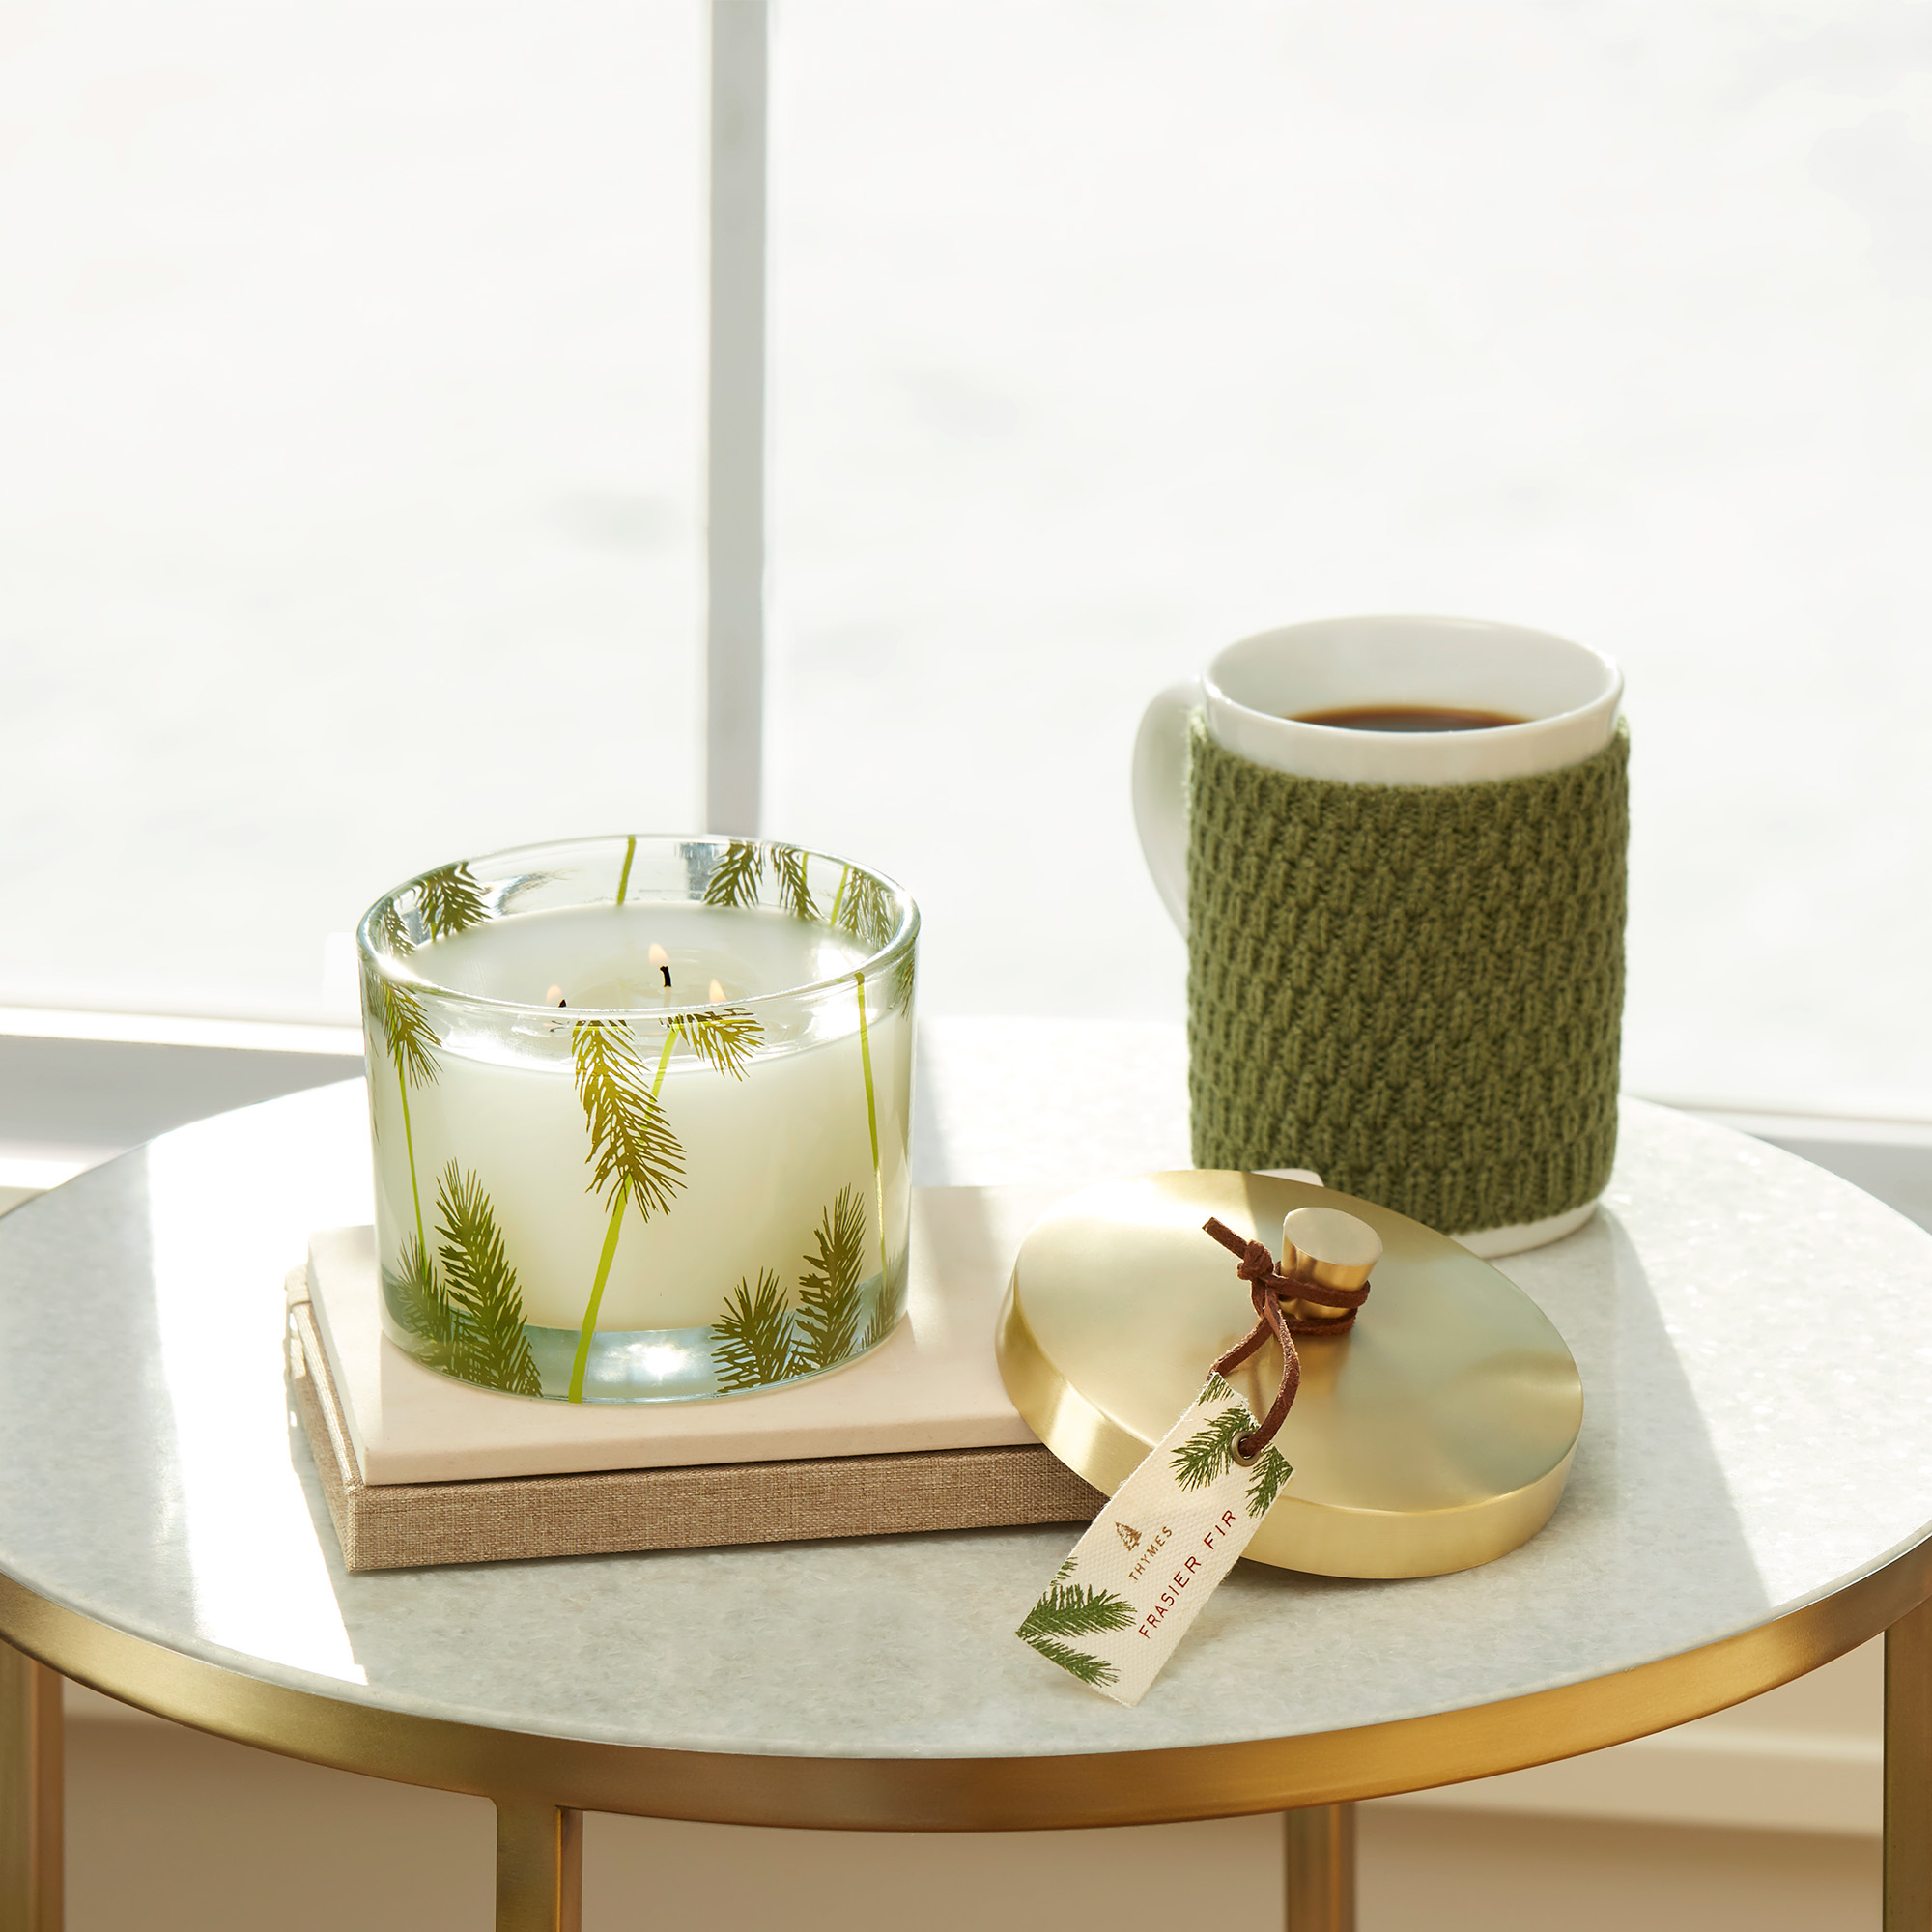 Thymes Frasier Fir 3 Wick Candle